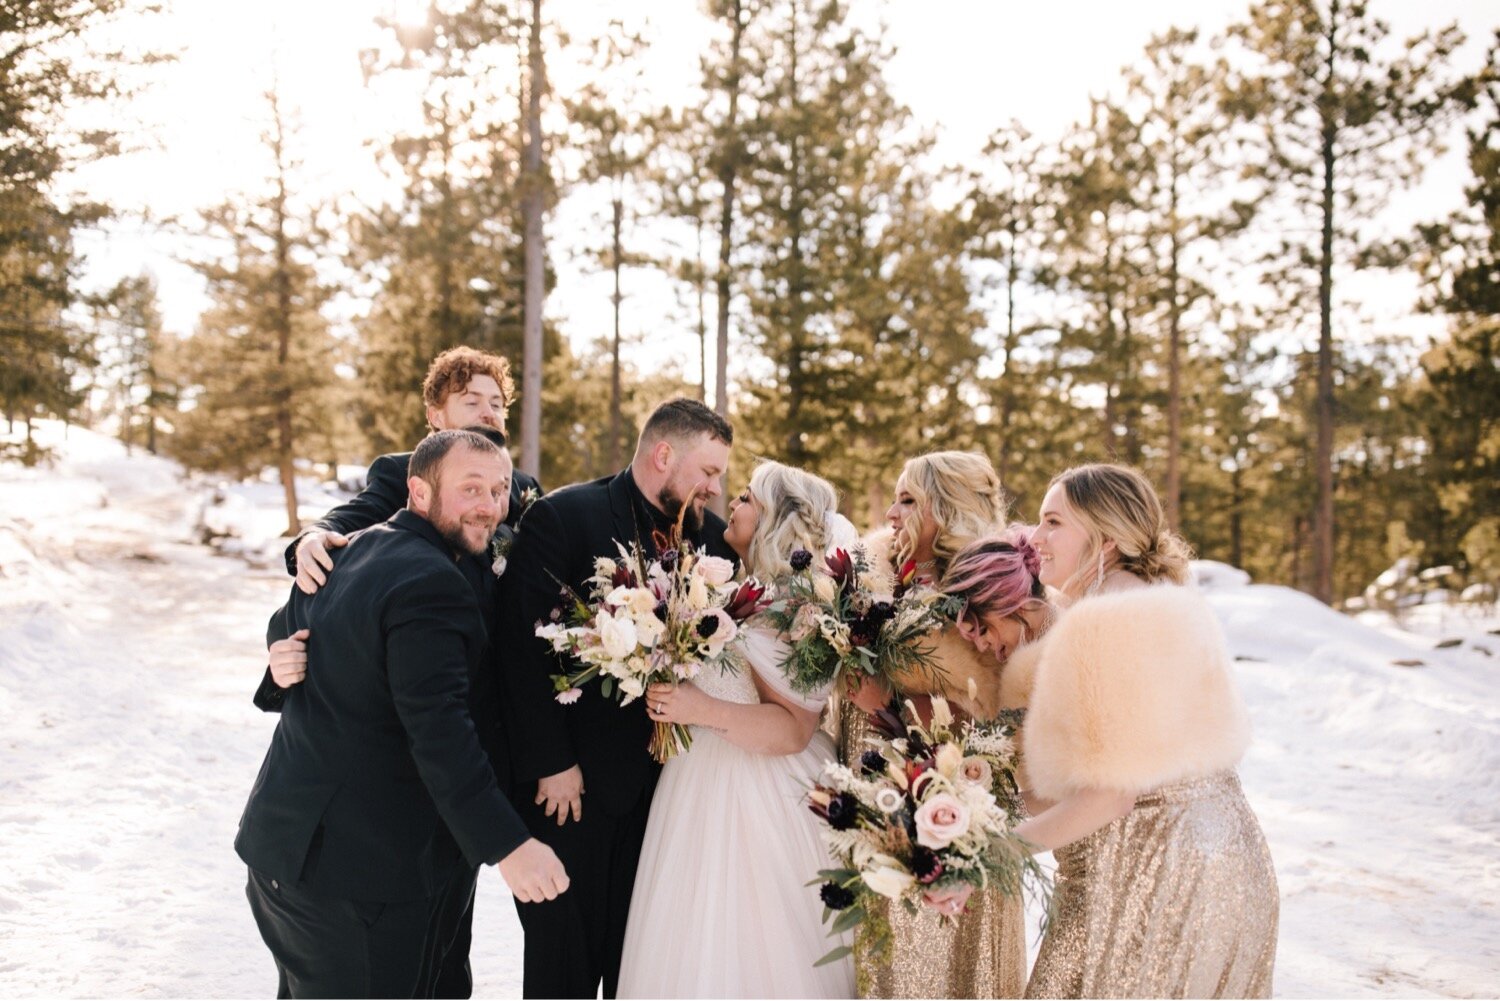  Bridal party, wedding party, bridesmaids dresses, bridesmaids photos, groomsmen photos, Winter Wedding, Colorado Wedding, Snowy Wedding, Mountain Wedding, Colorado Wedding Planner, Colorado Wedding Rentals, Red Feather Lakes Wedding, Fort Collins We